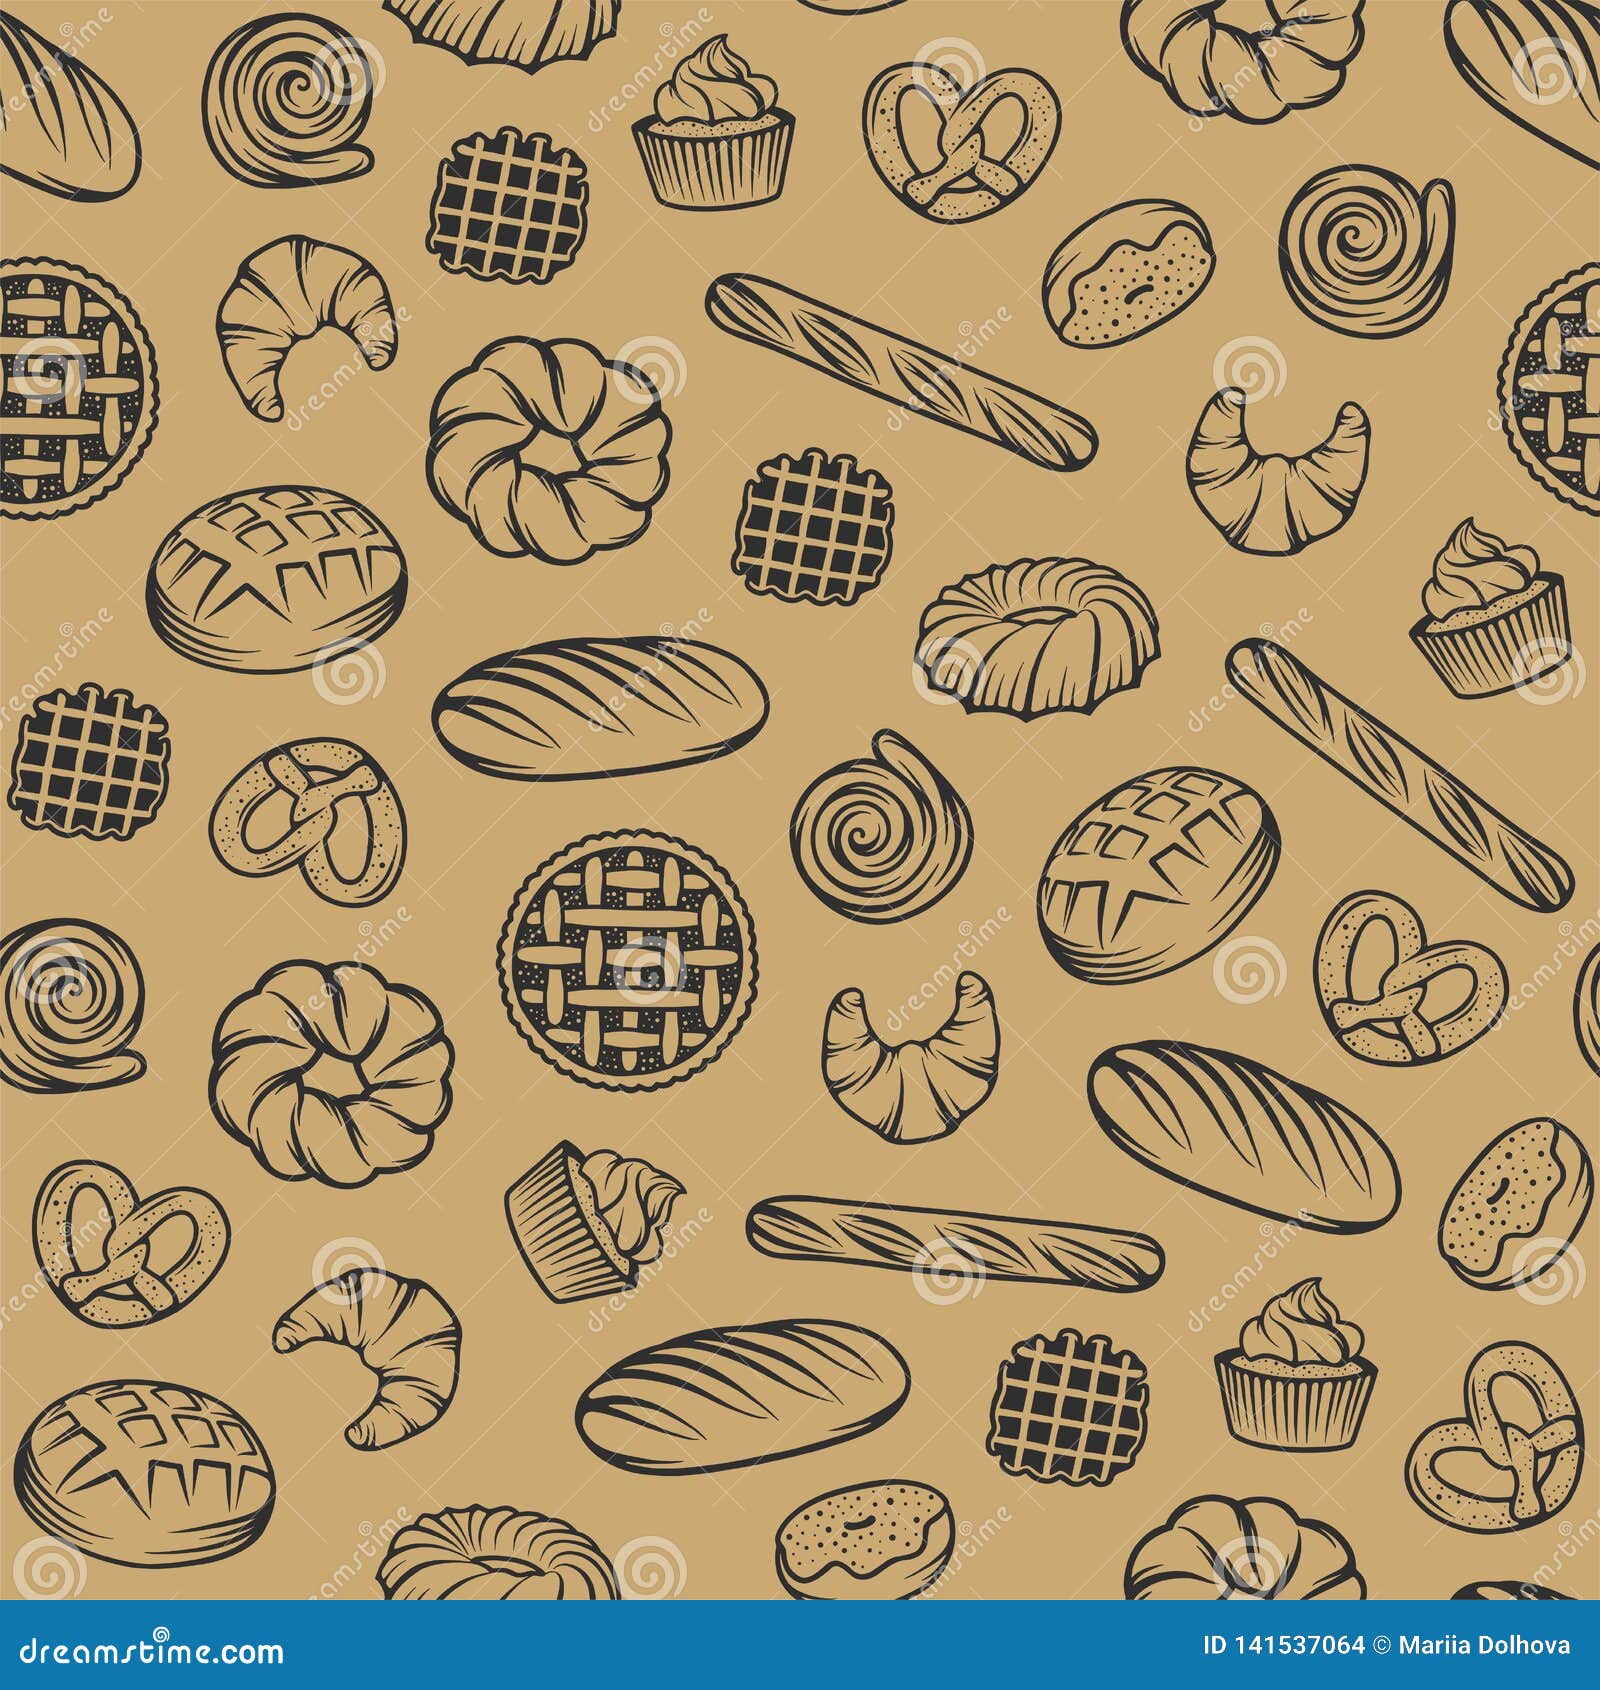 Bakery Vector Seamless Pattern with Engraved Elements. Background Design  with Bread, Pastry, Pie, Buns, Sweets, Cupcake Stock Vector - Illustration  of buns, background: 141537064